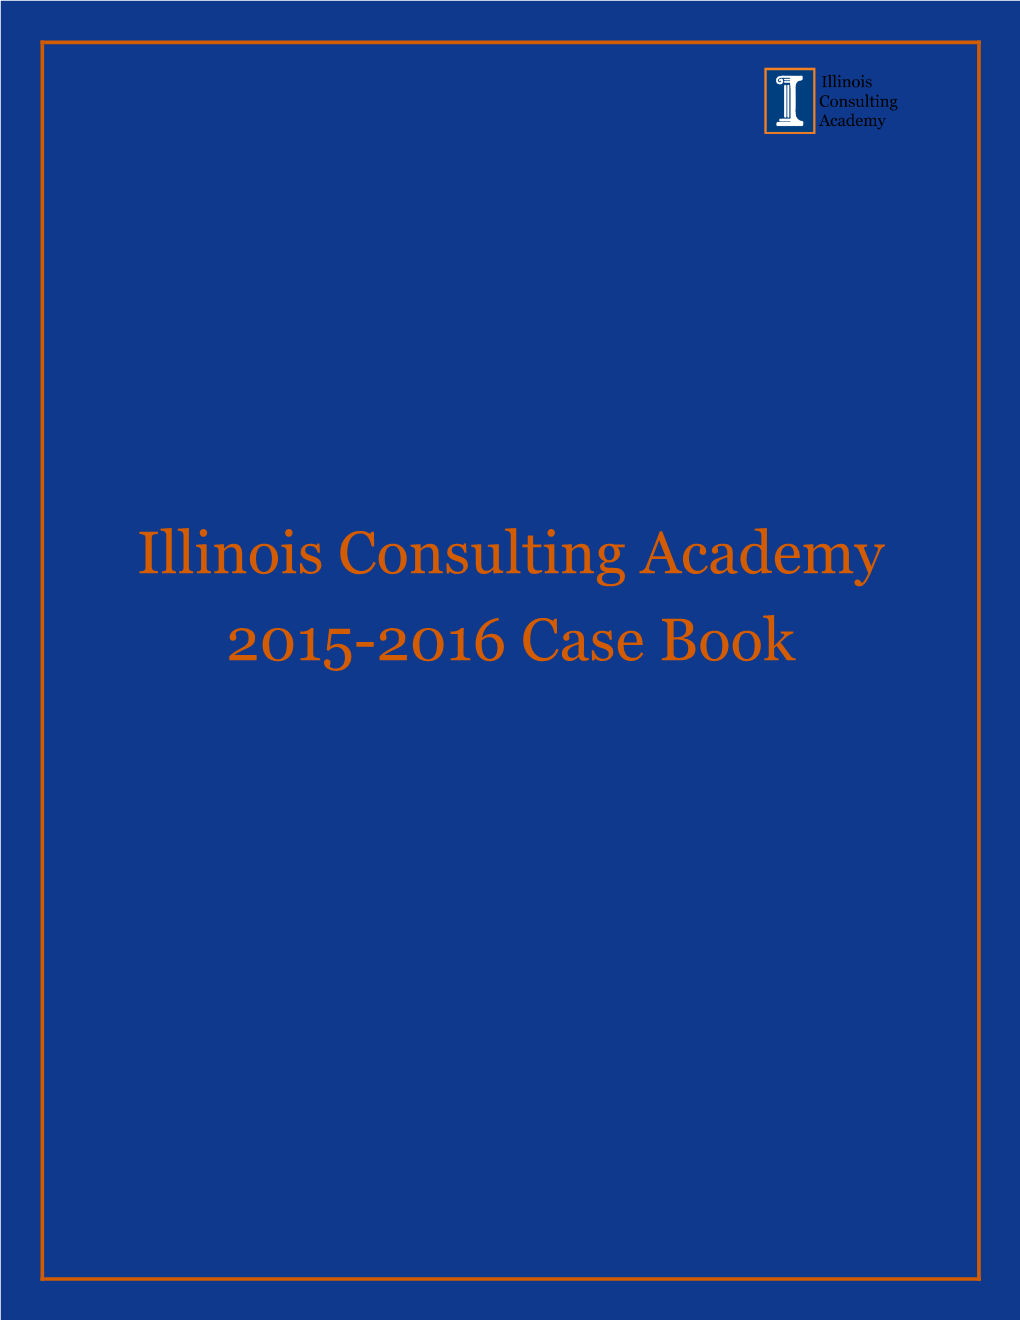 Illinois Consulting Academy 2015-2016 Case Book Table of Contents